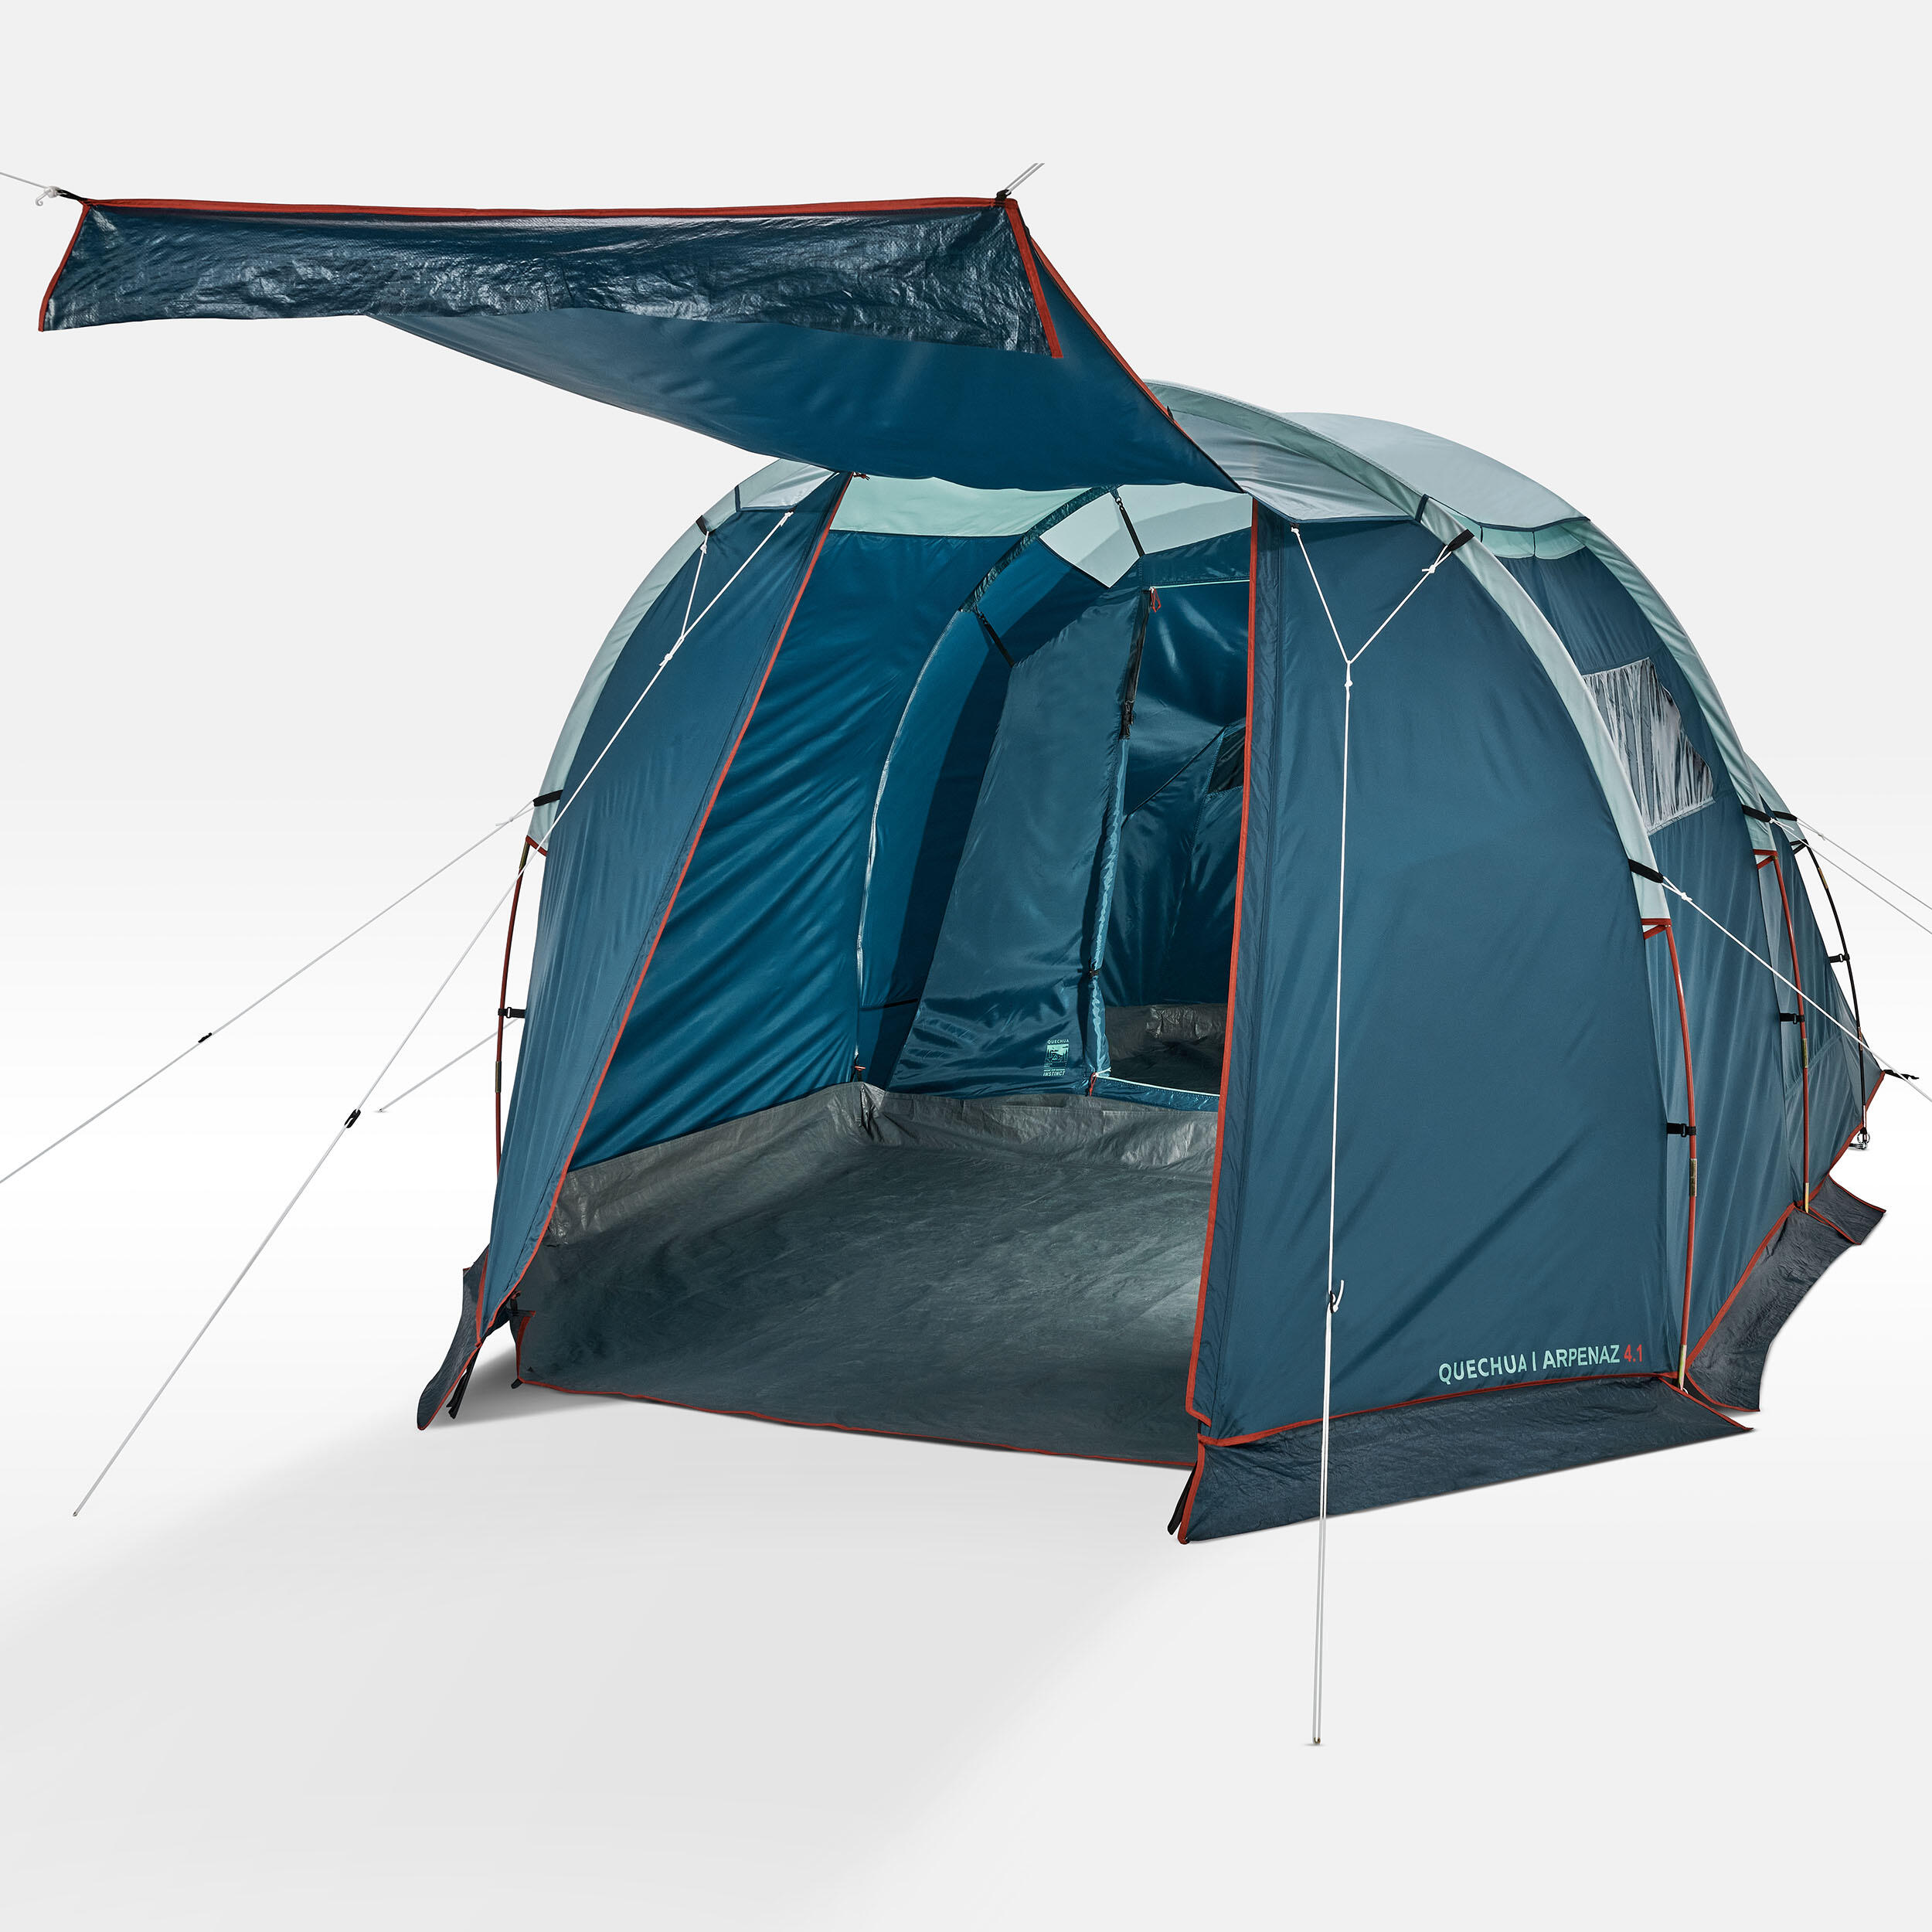 Camping tent with poles - Arpenaz 4.1 - 4 Person - 1 Bedroom 8/17